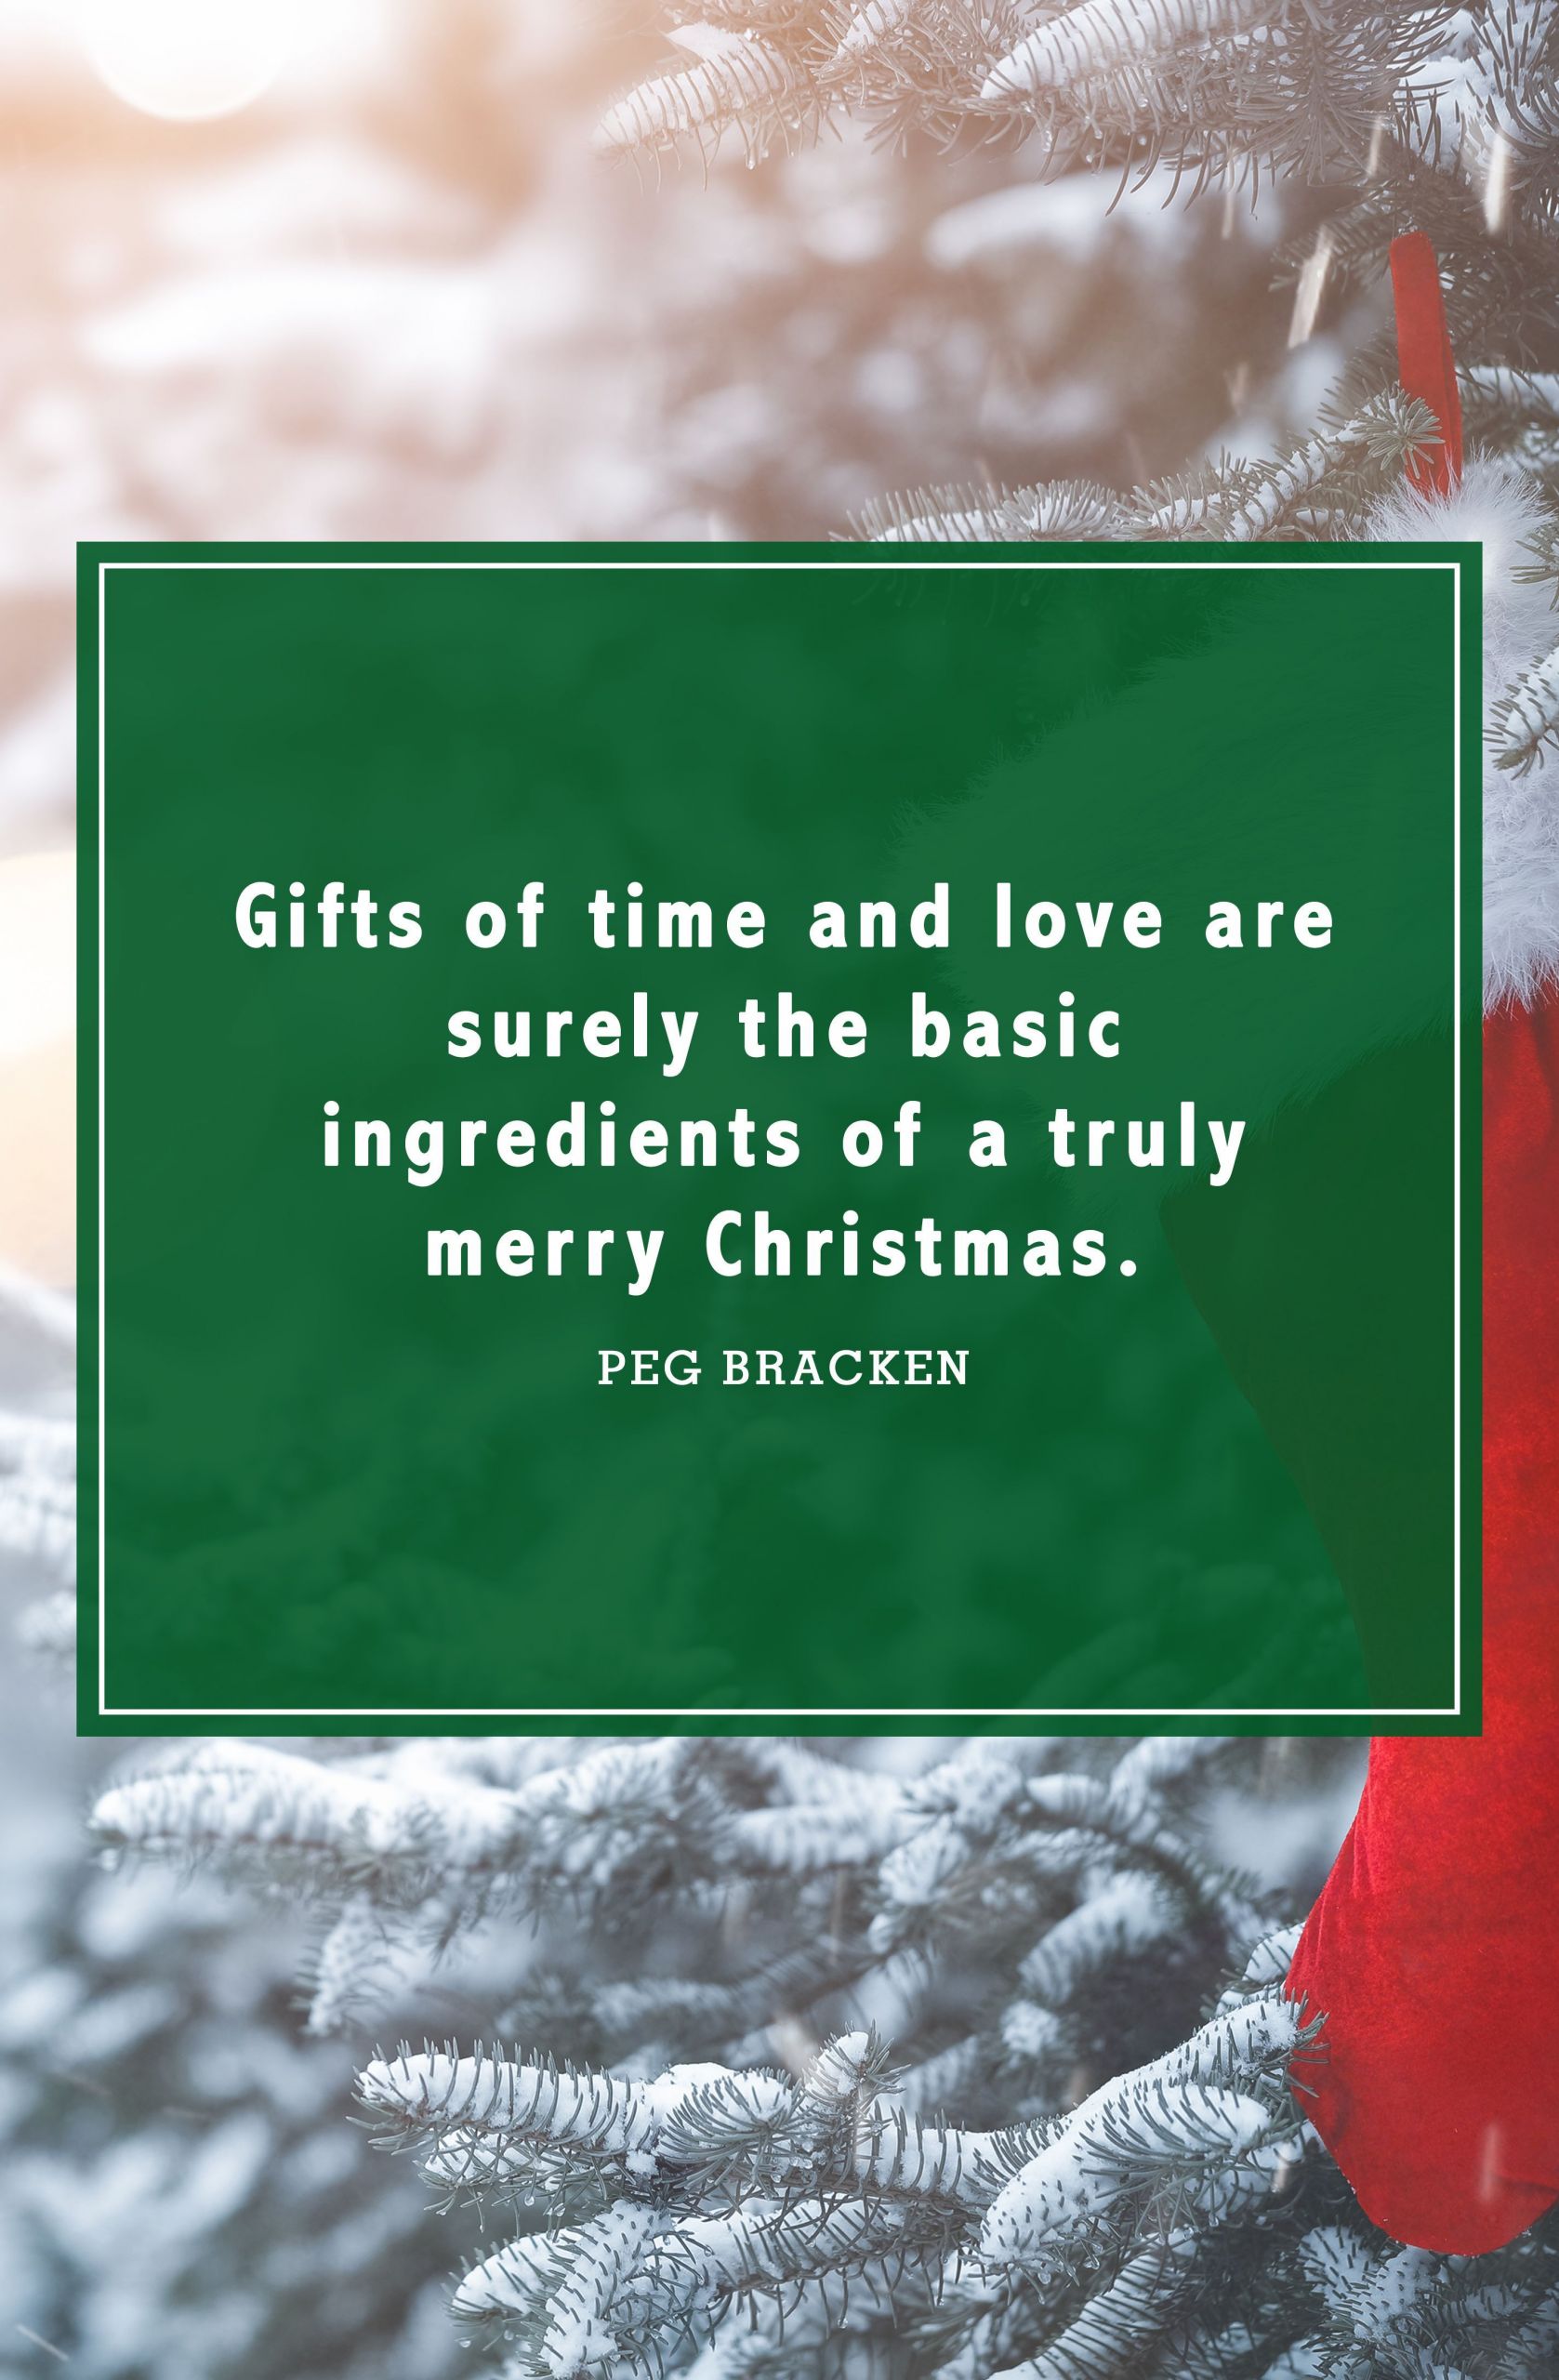 Inspirational Quote For Christmas
 Beautiful Christmas Quotes